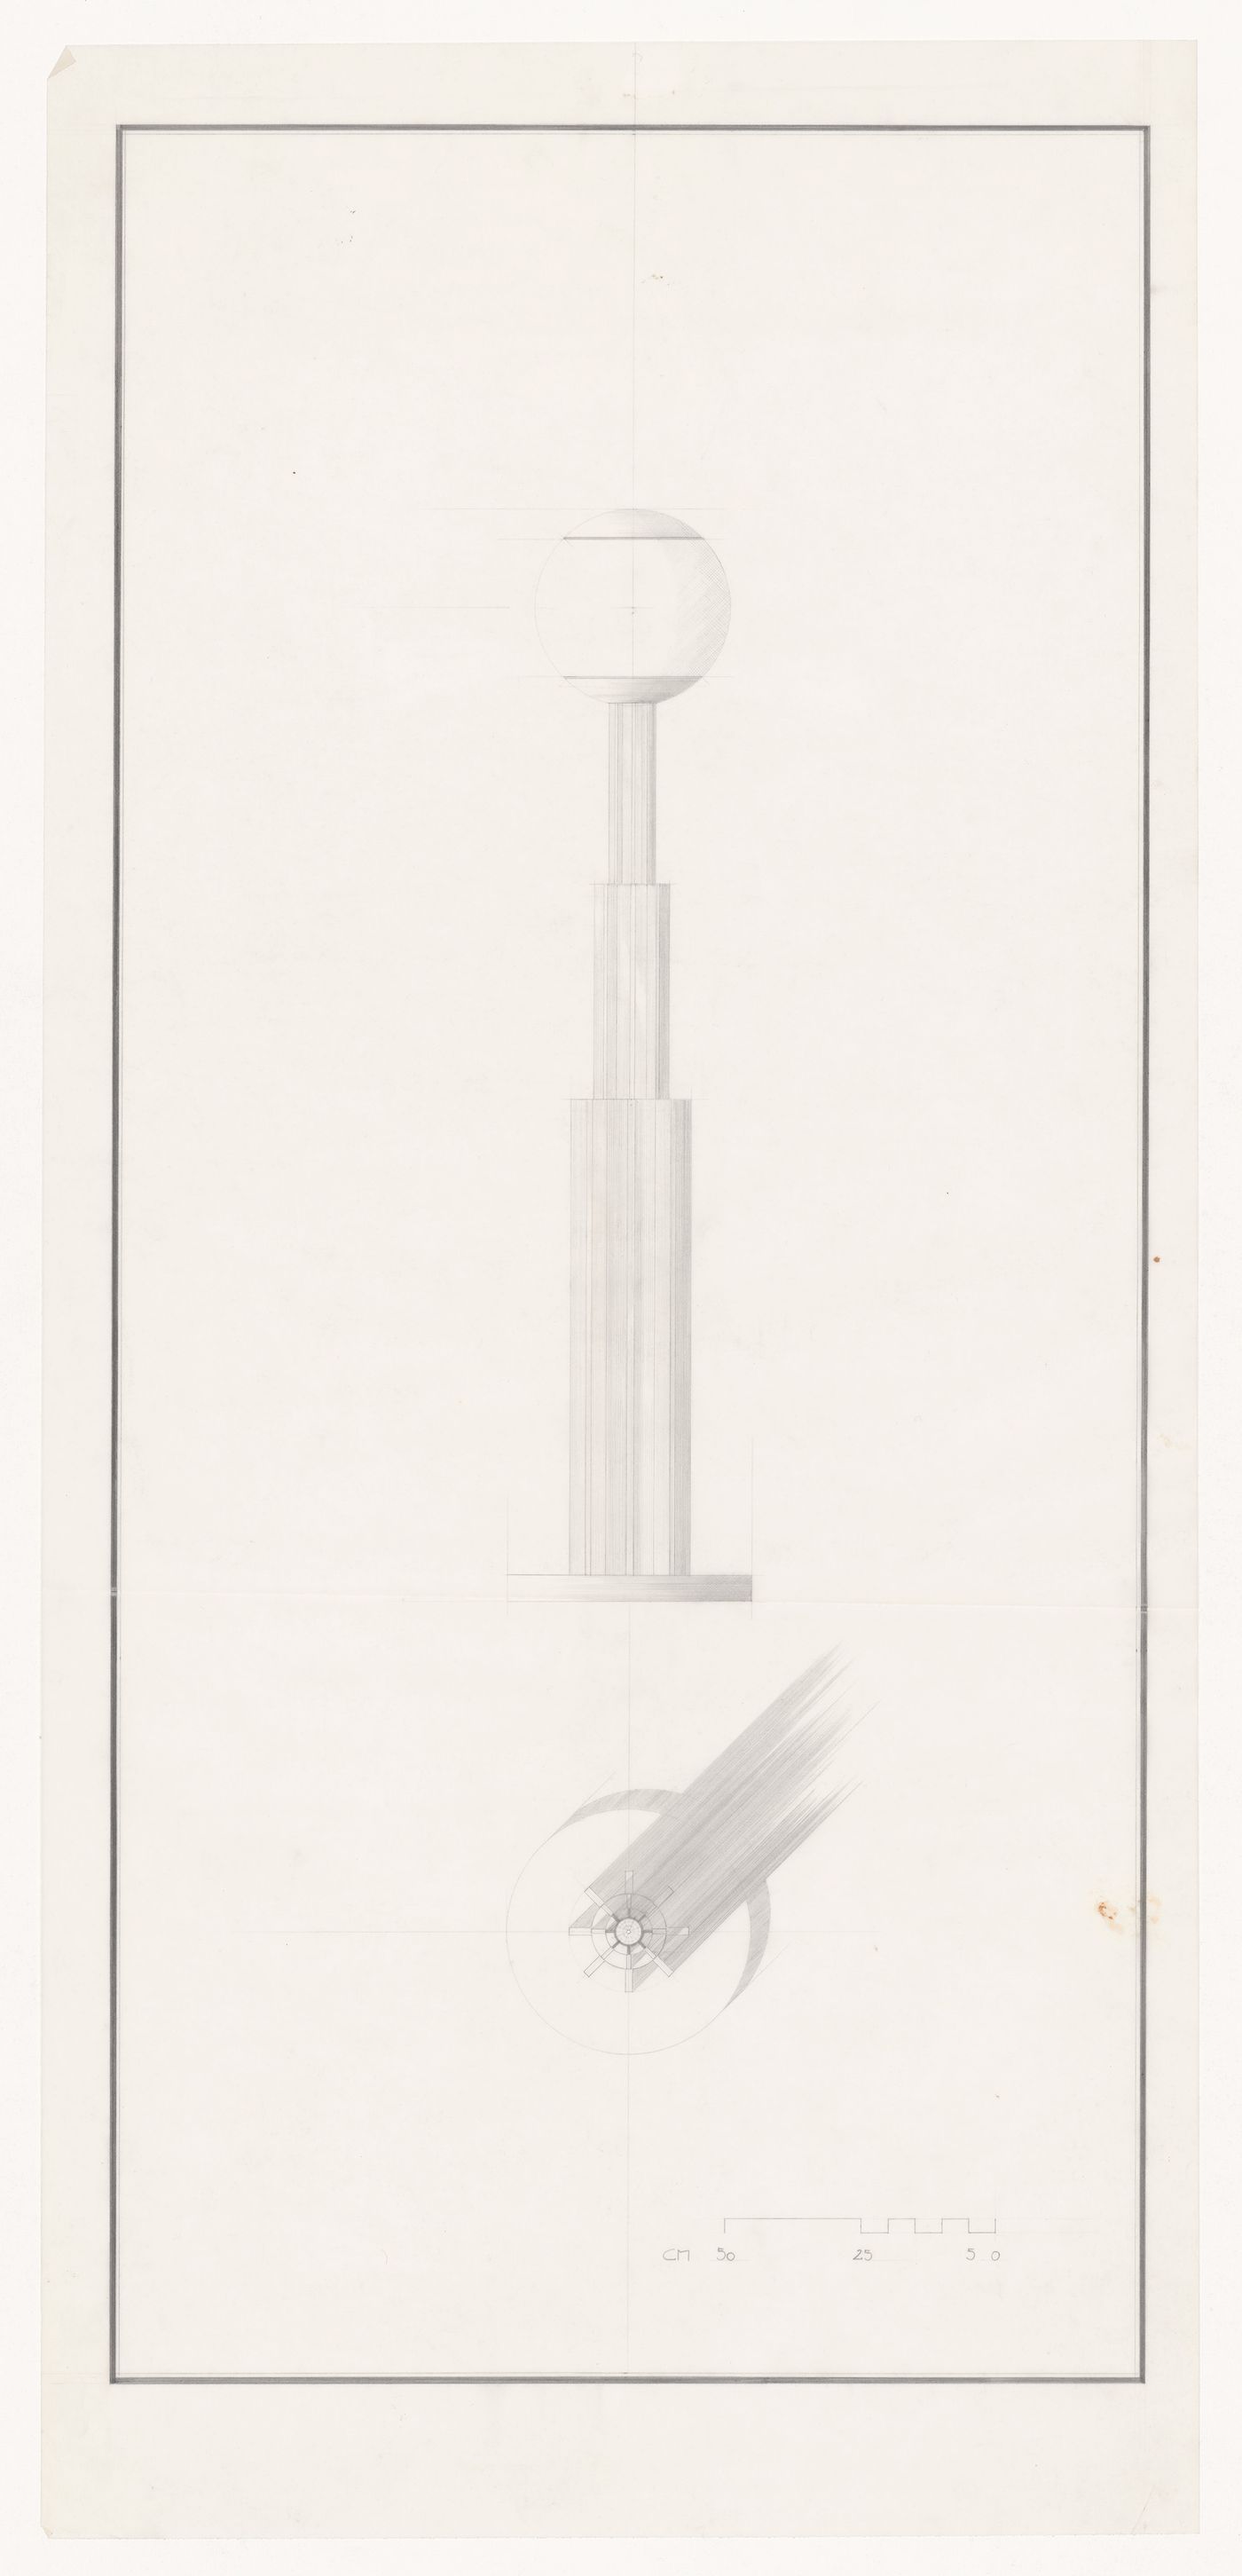 Elevation and plan for Lampada Alessi